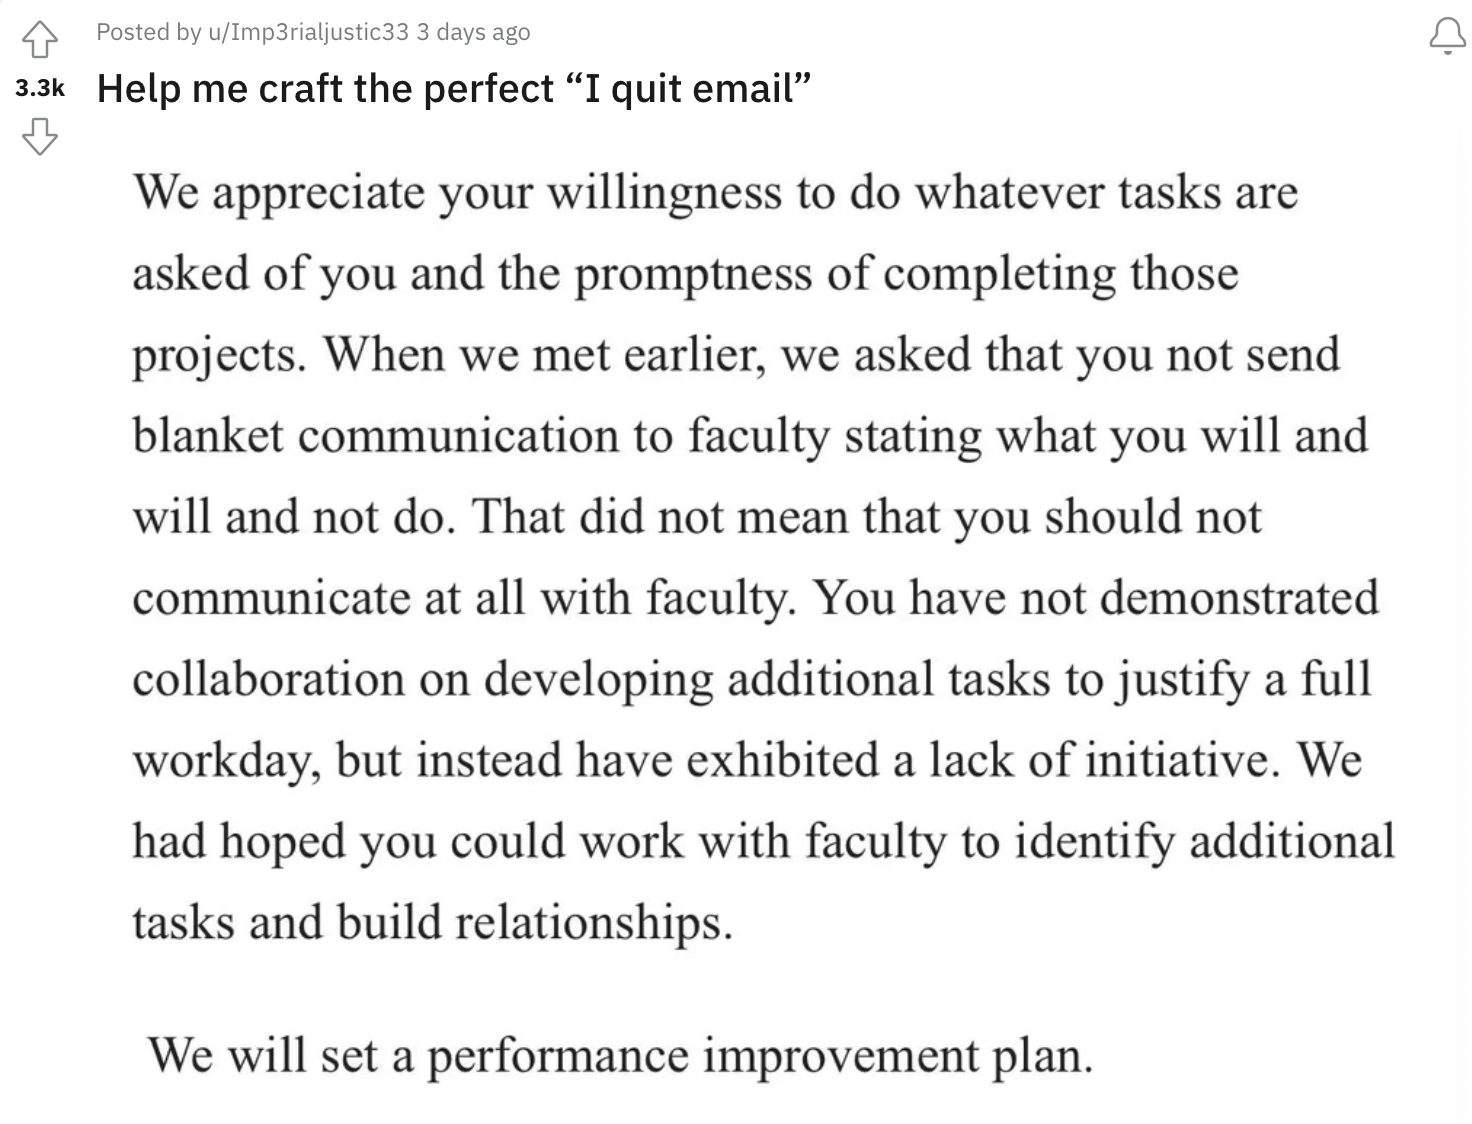 document - Posted by uImp3rialjustic33 3 days ago Help me craft the perfect "I quit email" We appreciate your willingness to do whatever tasks are asked of you and the promptness of completing those projects. When we met earlier, we asked that you not sen